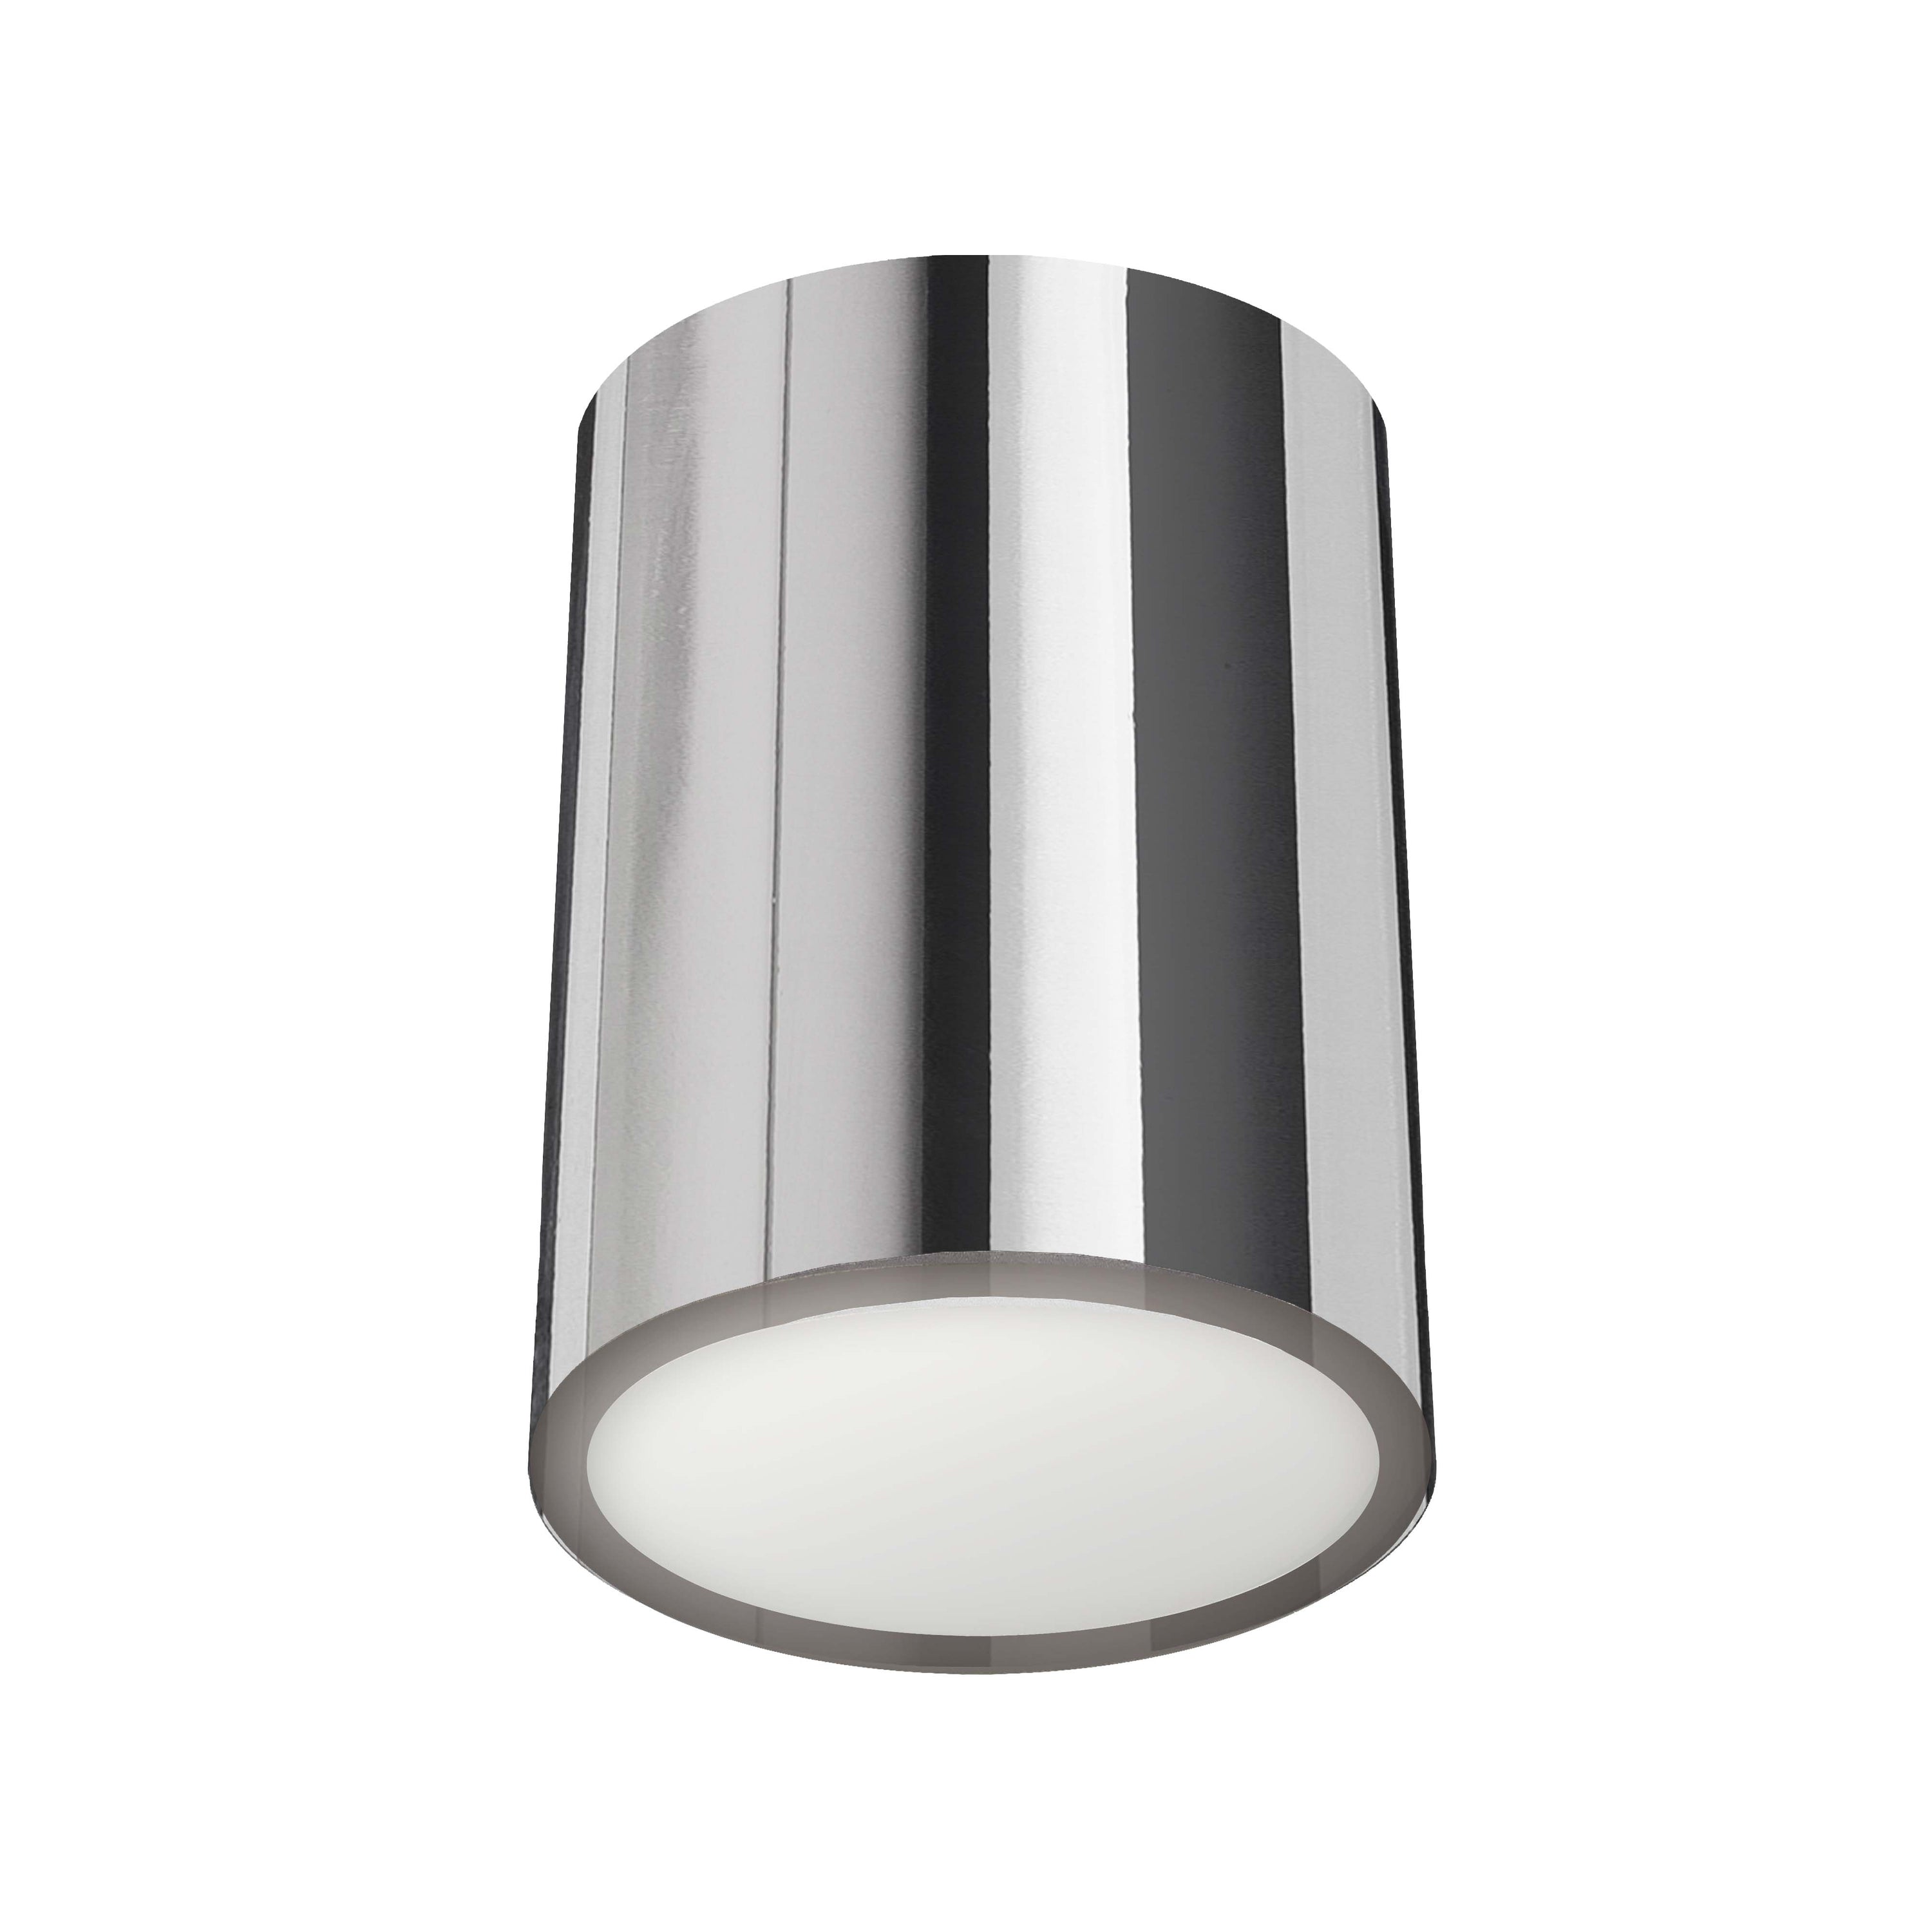 Dainolite ECO-C512-PC 12W Flush Mount Polished Chrome with Frosted Acrylic Diffuser